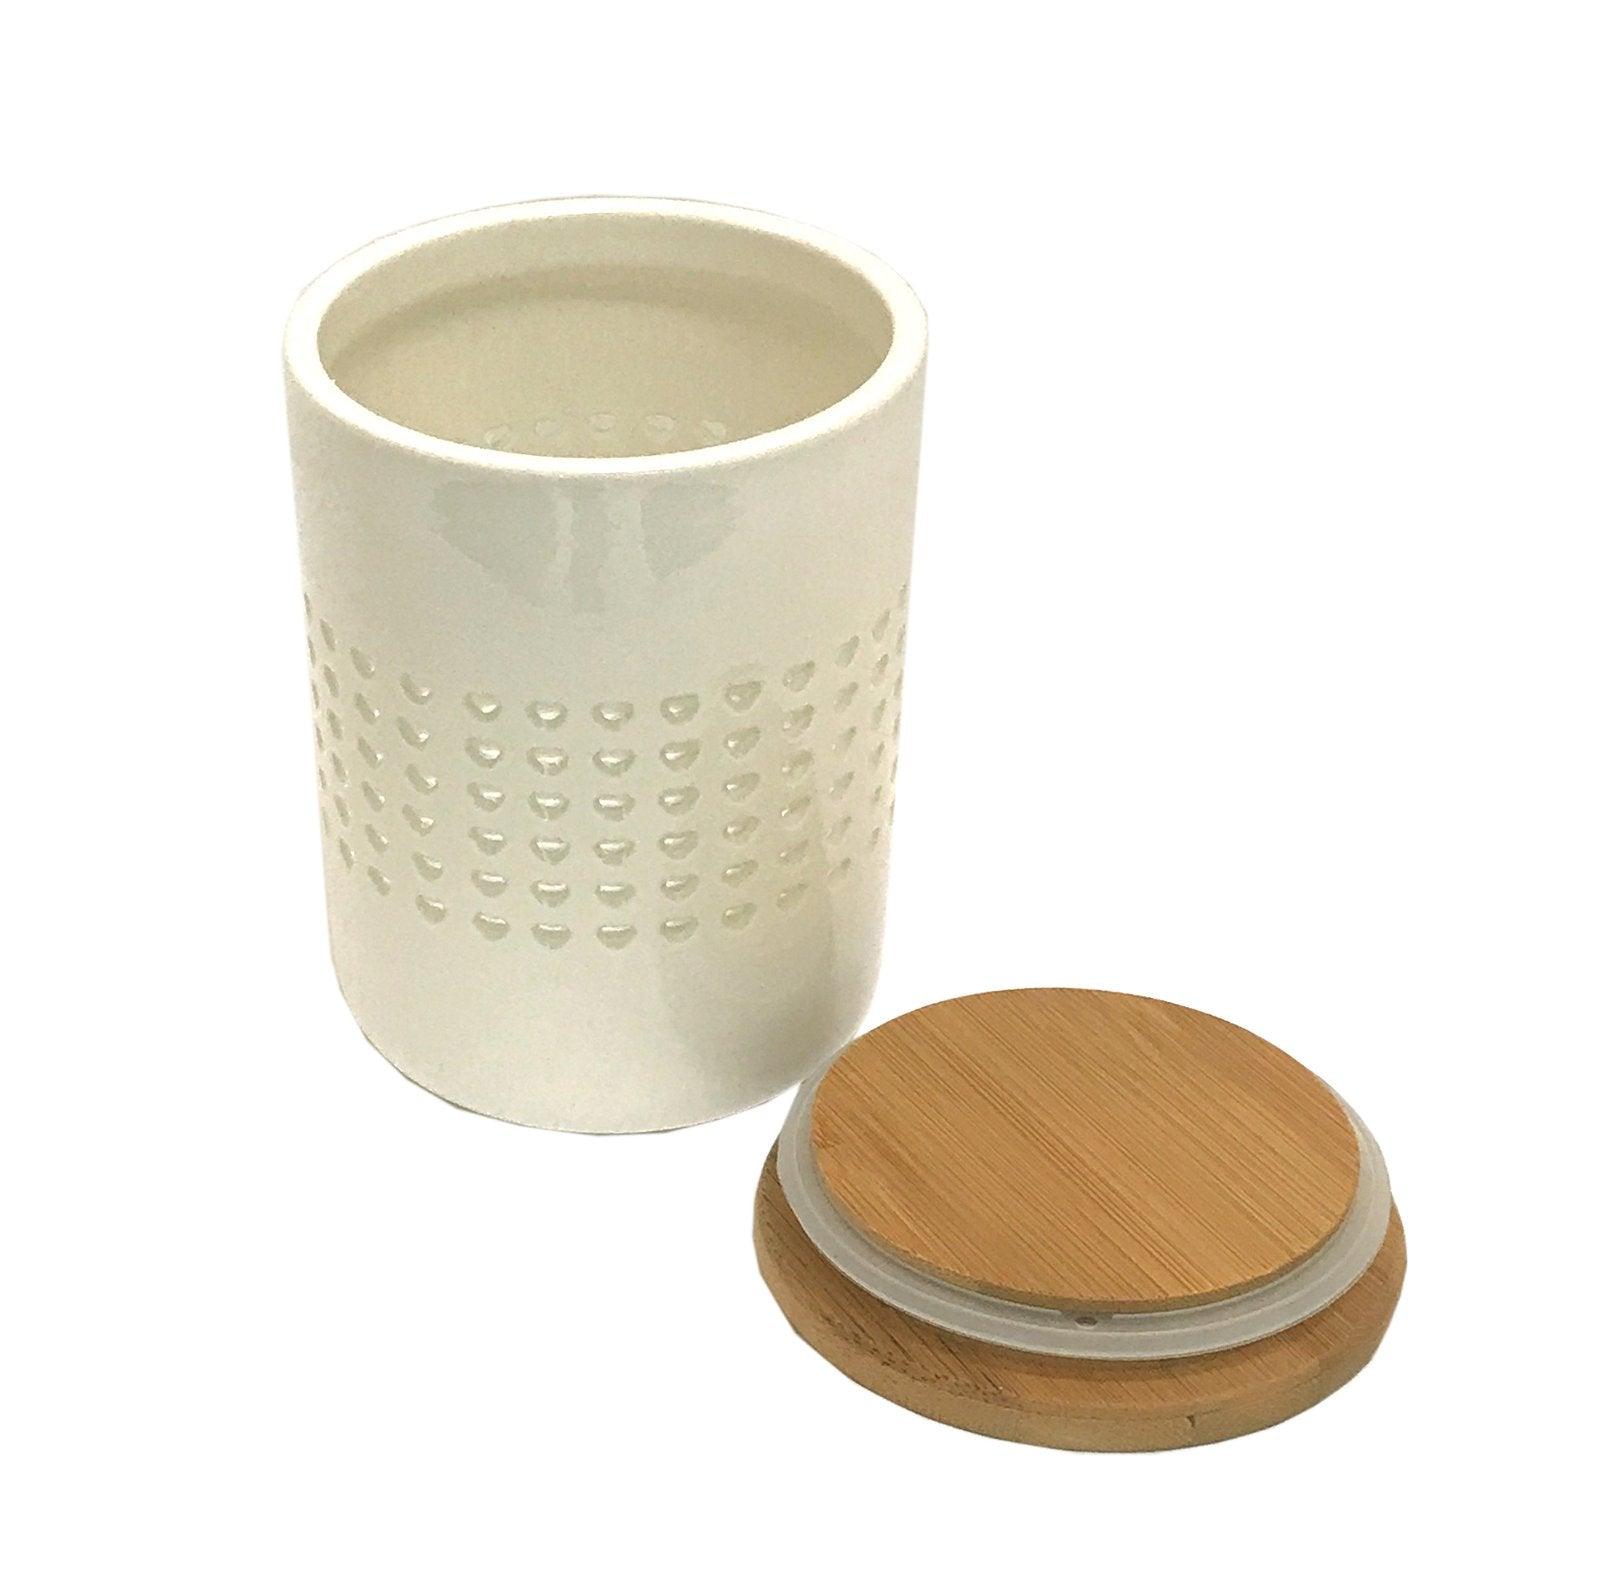 View Heart Cut Out Storage Canister With Wood Lid information